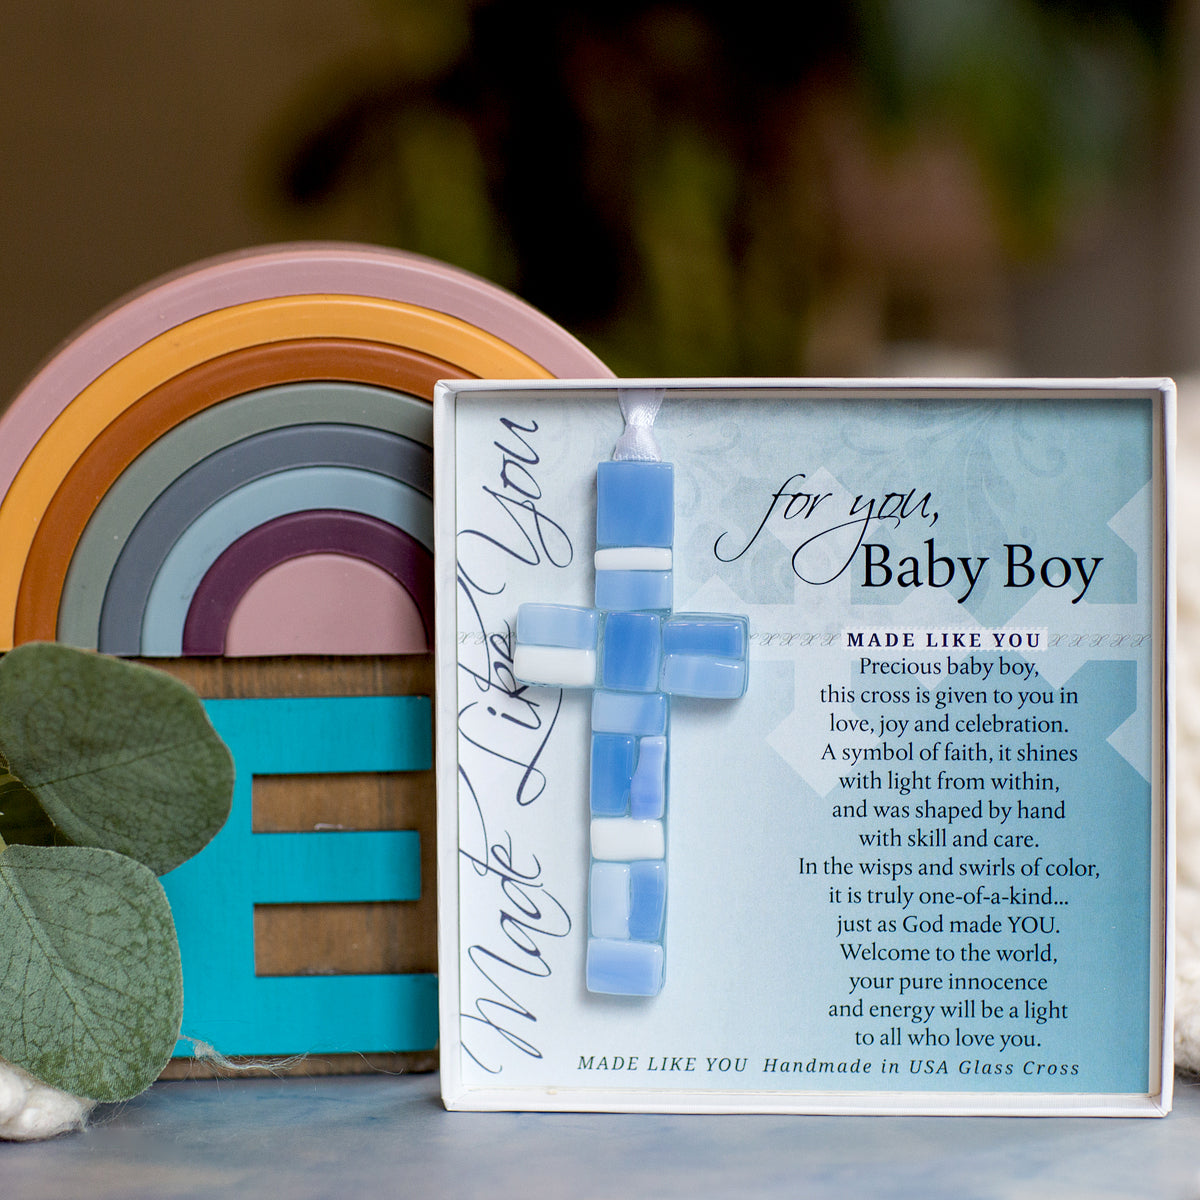 For You Baby Boy gift in nursery setting.